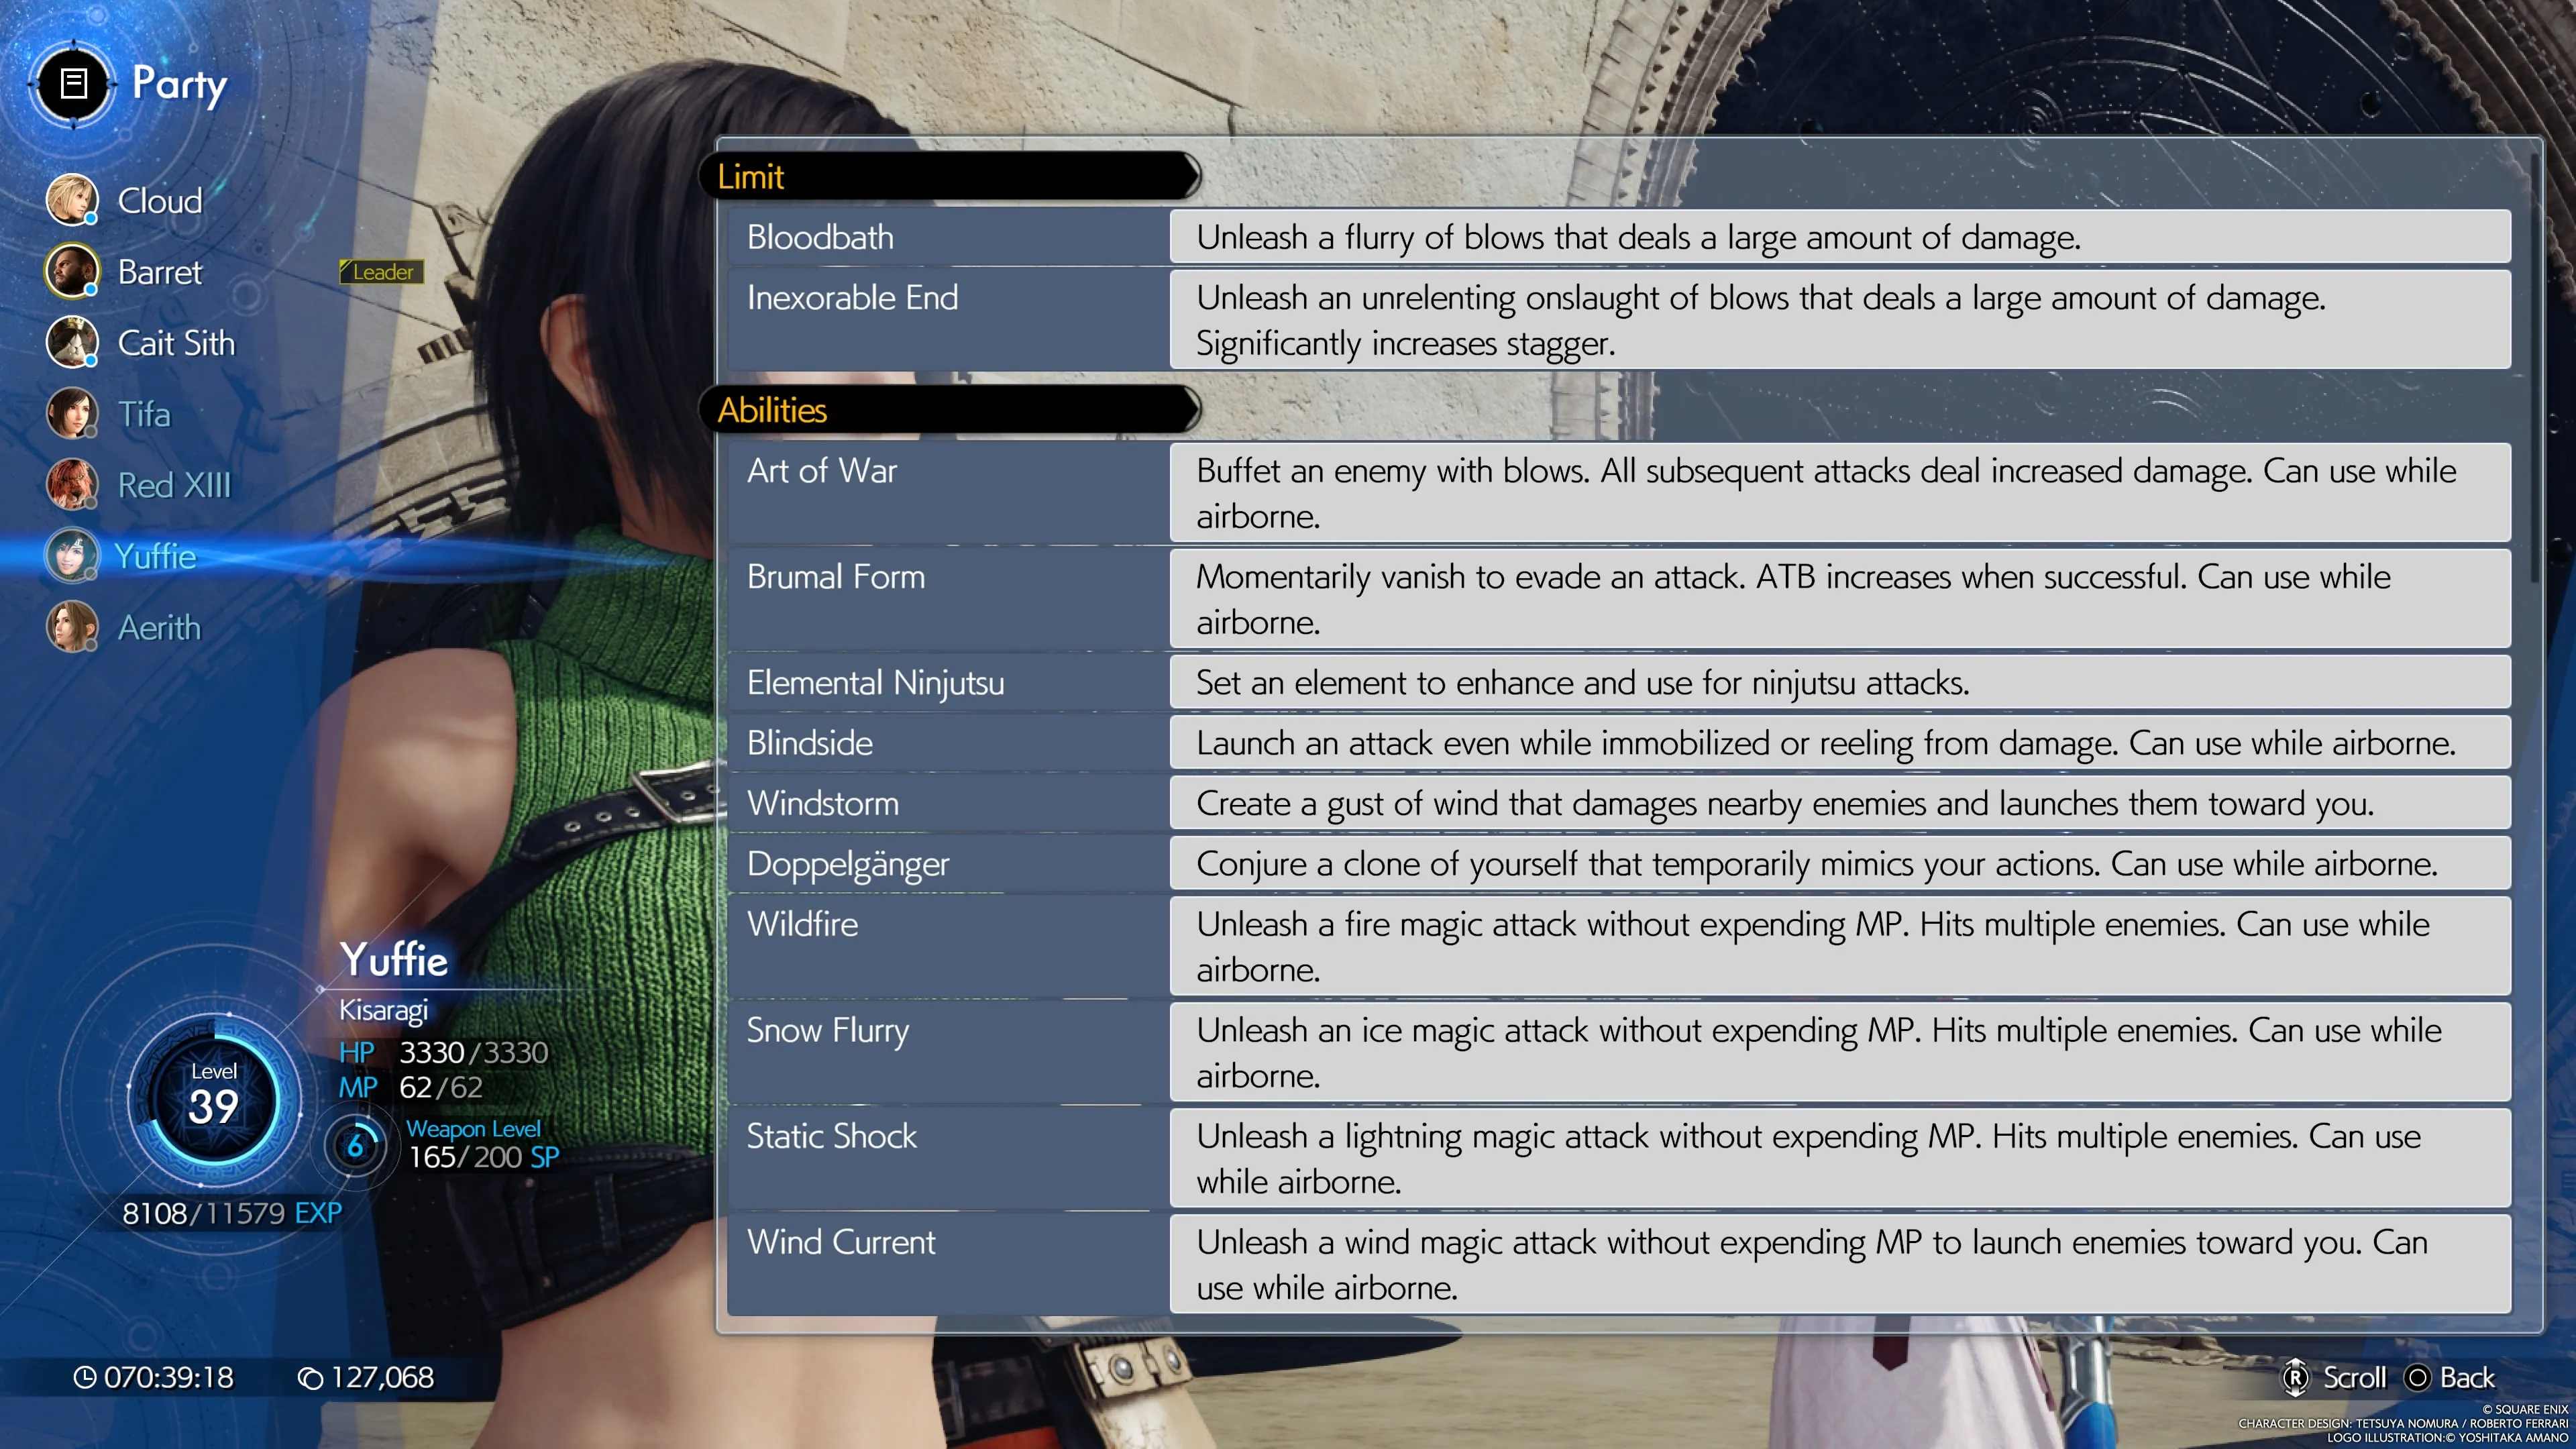 FINAL FANTASY VII REBIRTH Yuffie Limits And Abilities as seen in the in-game menu